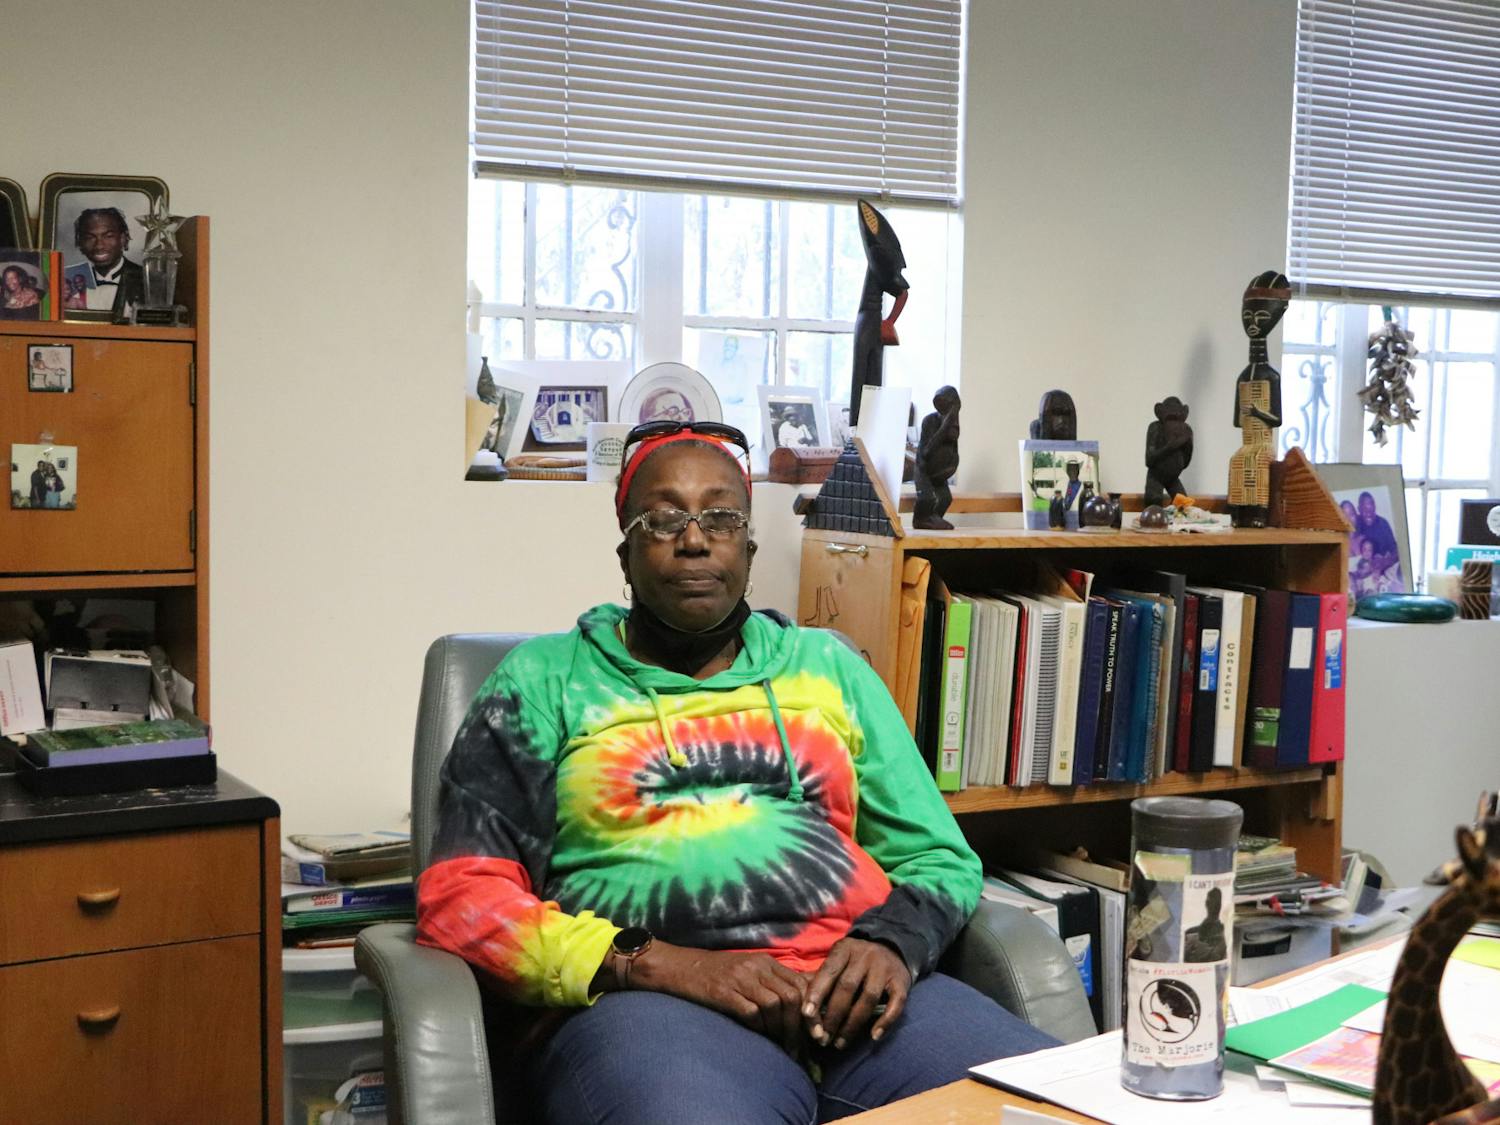 NKwanda Jah sits in her office at Wilhelmina Johnson Center on Wednesday, Feb. 16, 2022. Jah runs an afterschool science program from her office.